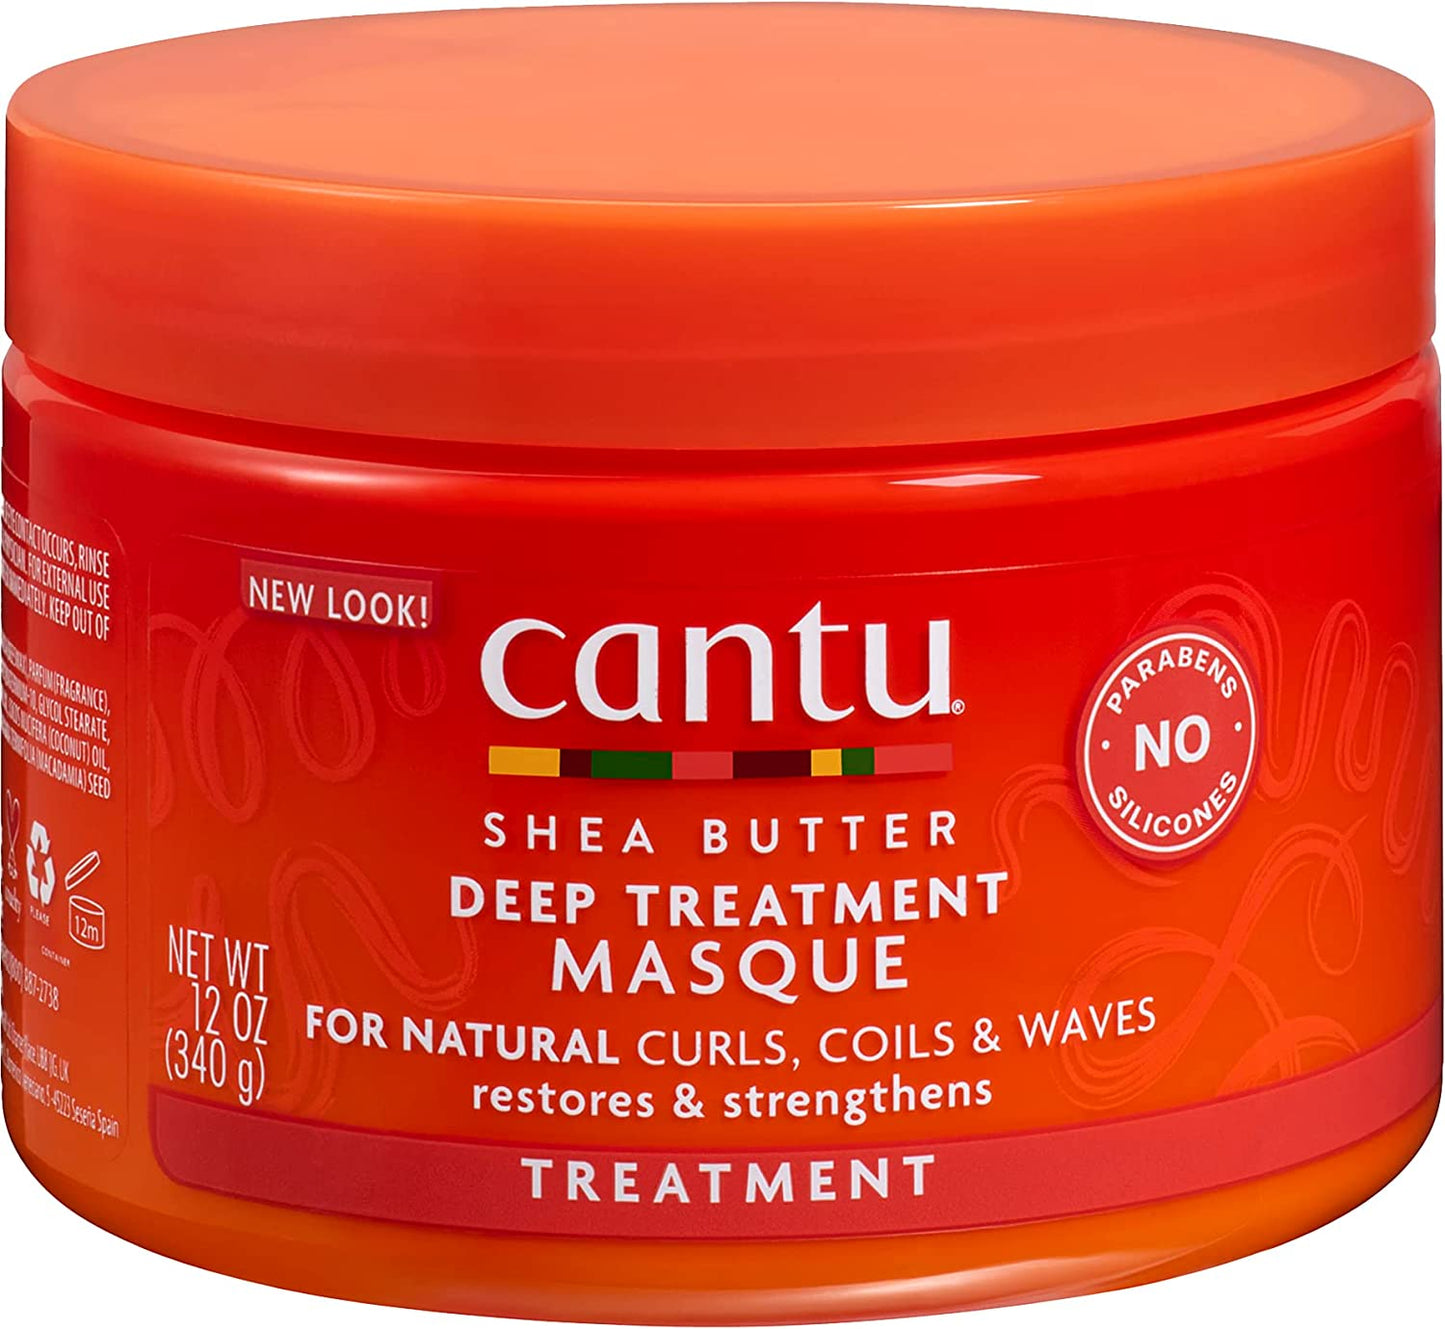 Cantu Shea Butter Deep Treatment Masque, 12 Ounce / 340 g PACKAGING MAY VARY